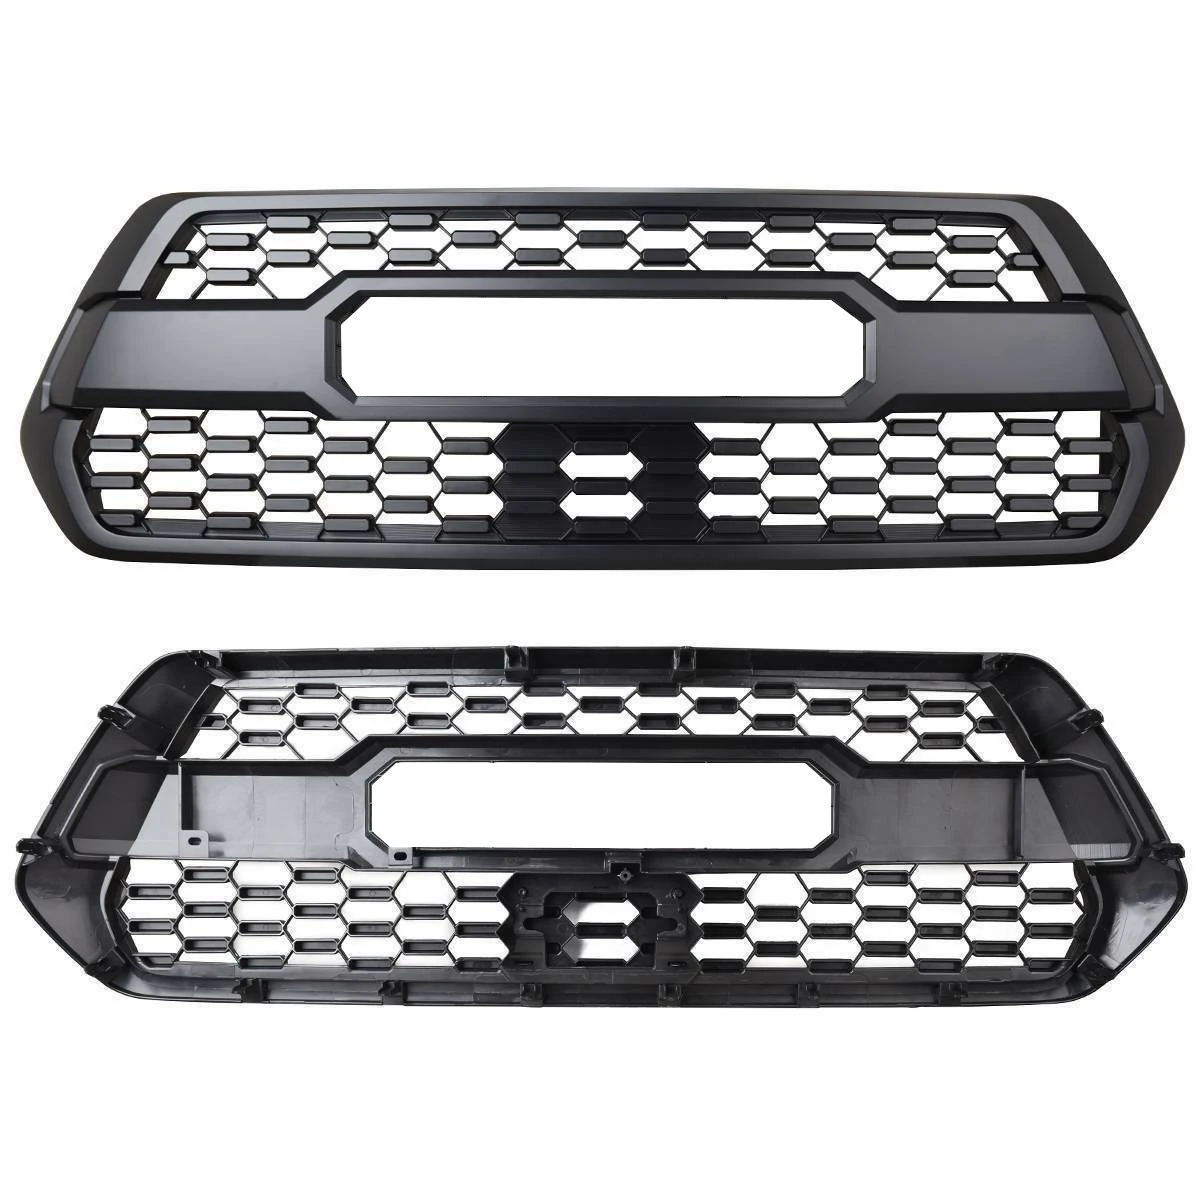 Modified ABS plastic material mesh front grille for toyota tacoma